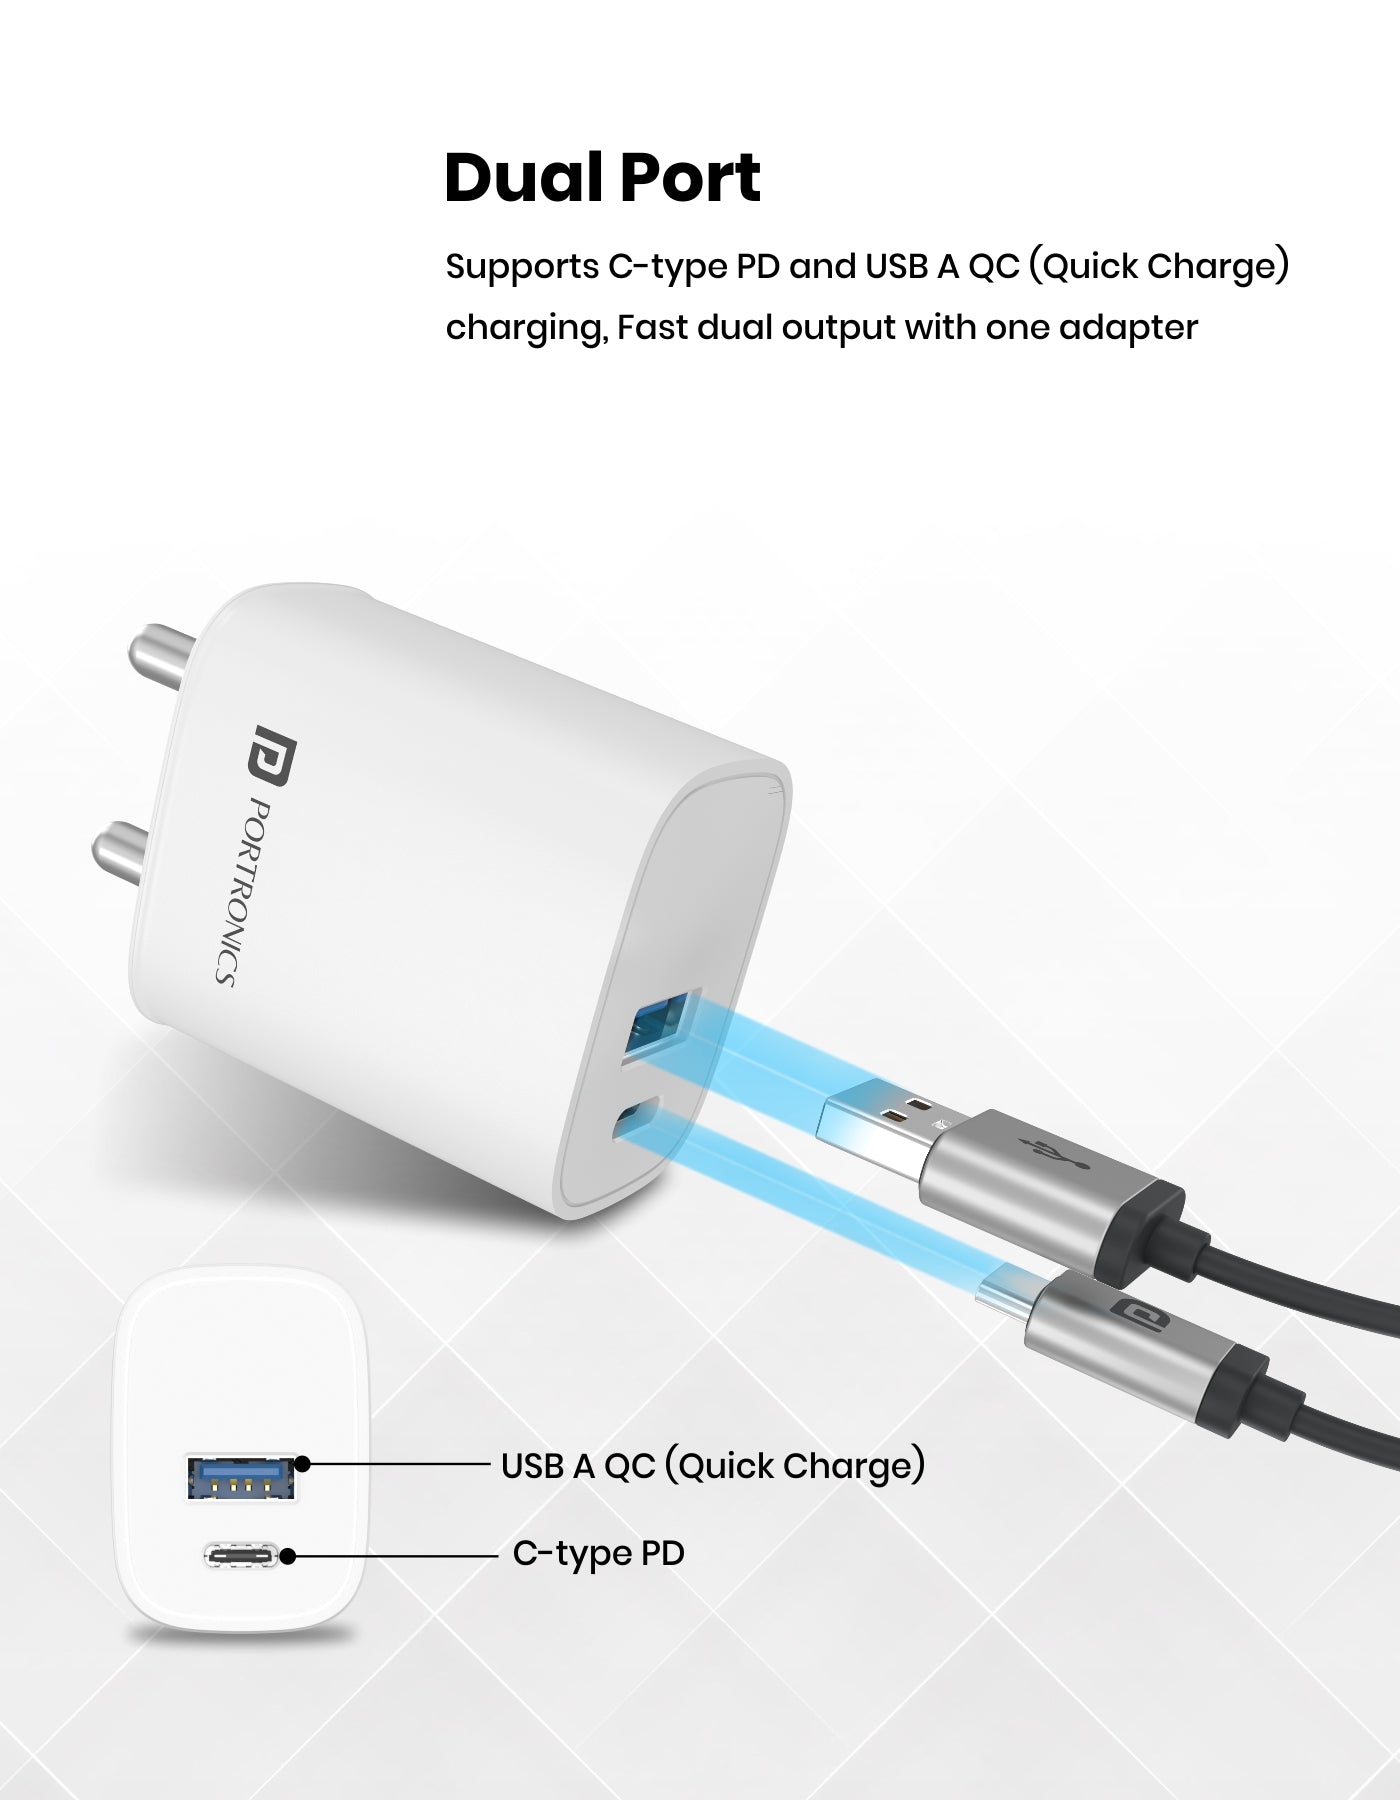 Portronics Adapto 30 Fast charger supports C-type and USB A charging, Fast dual output with one adapter.